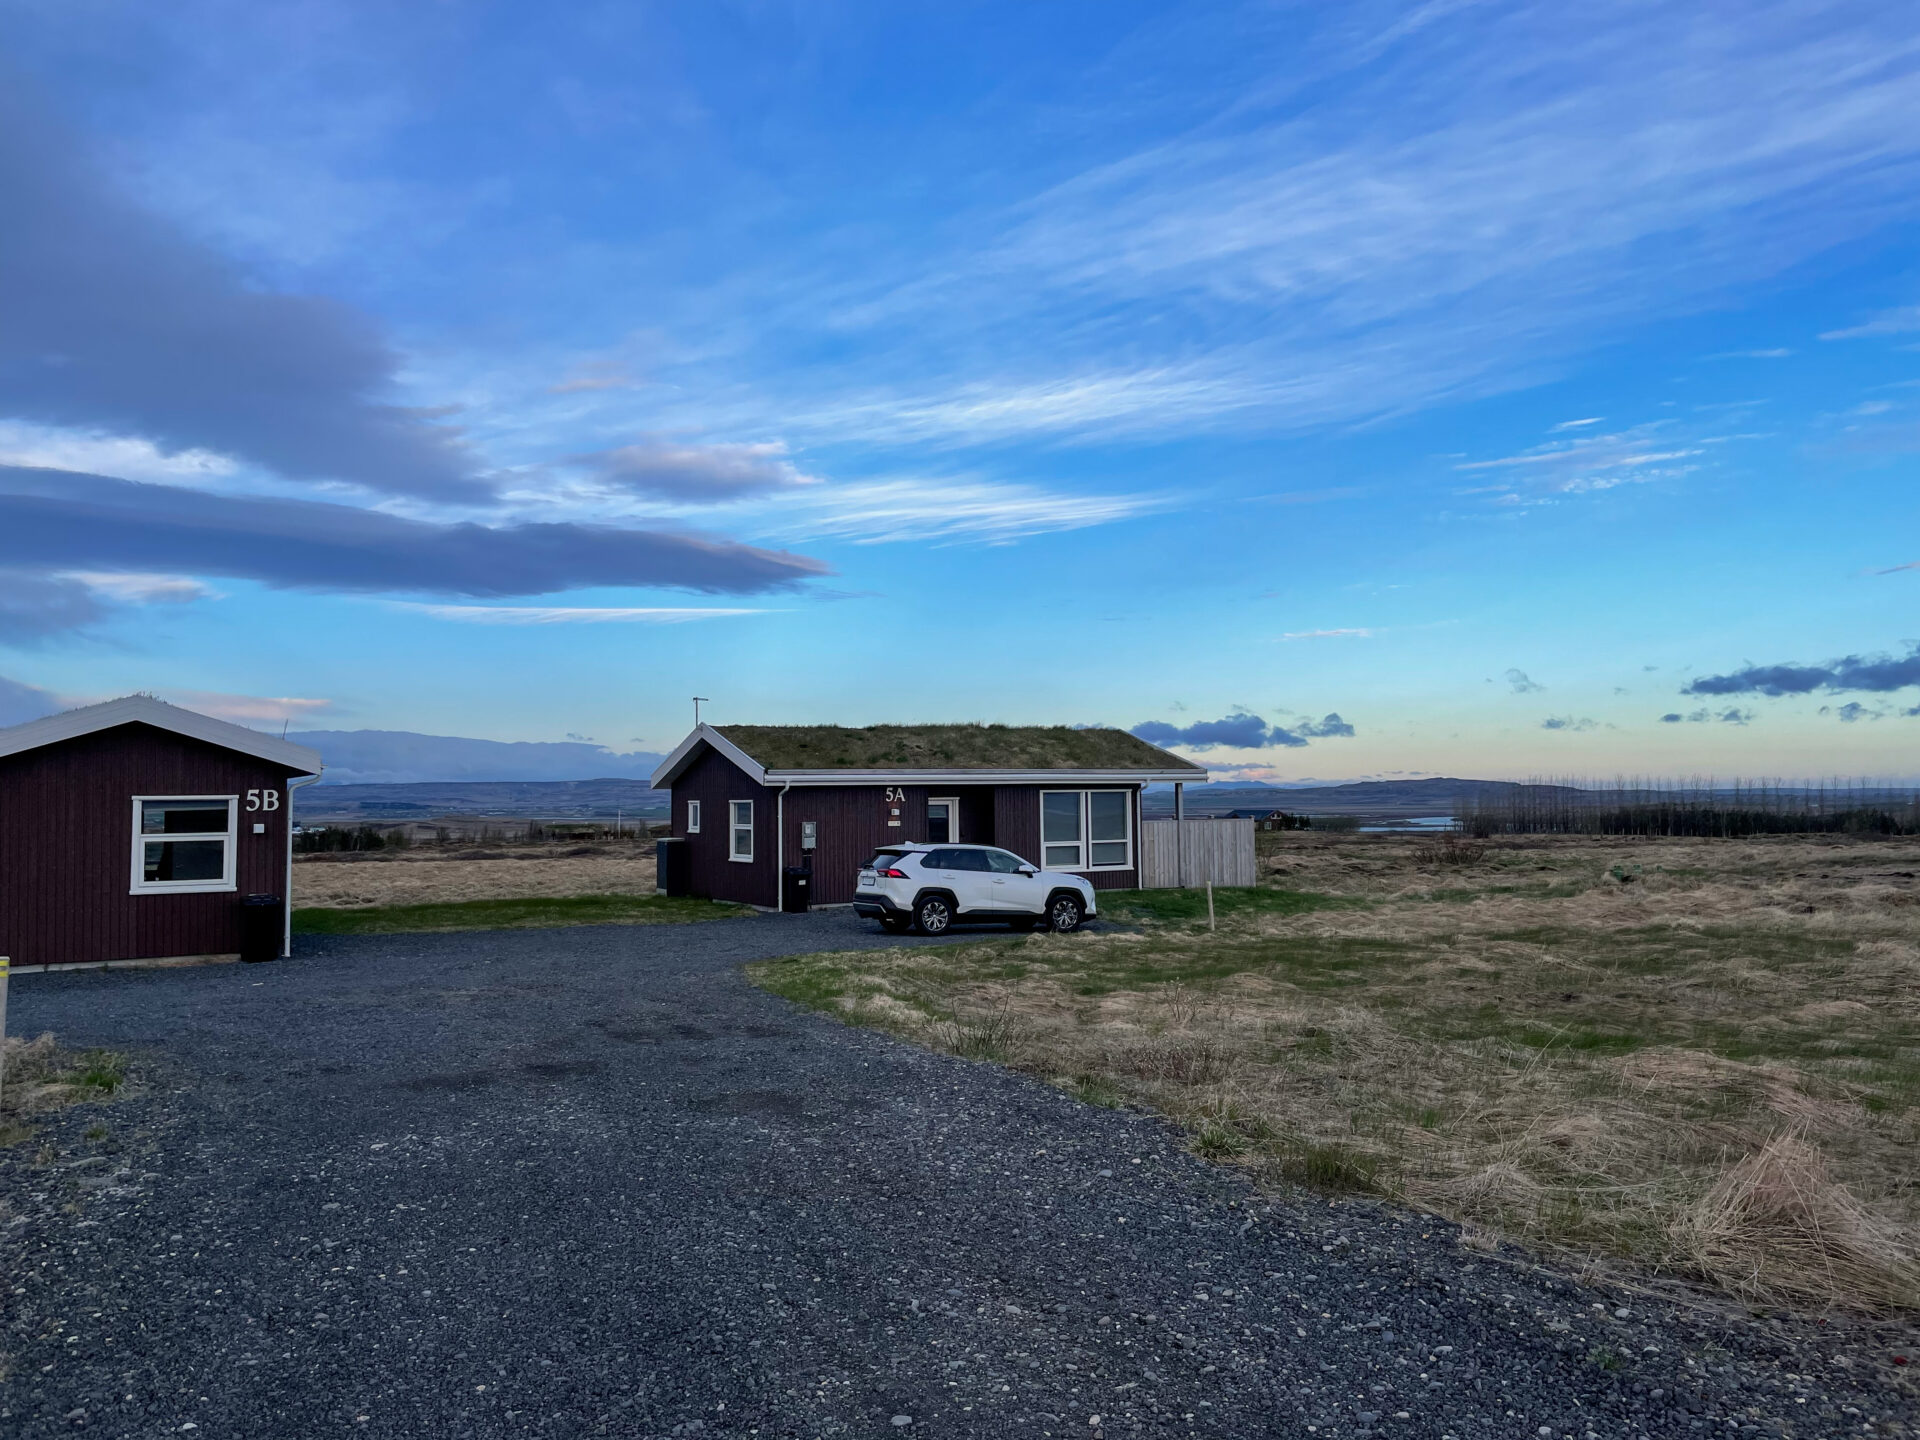 Selfoss is a great place to stay for exploring the Golden Circle